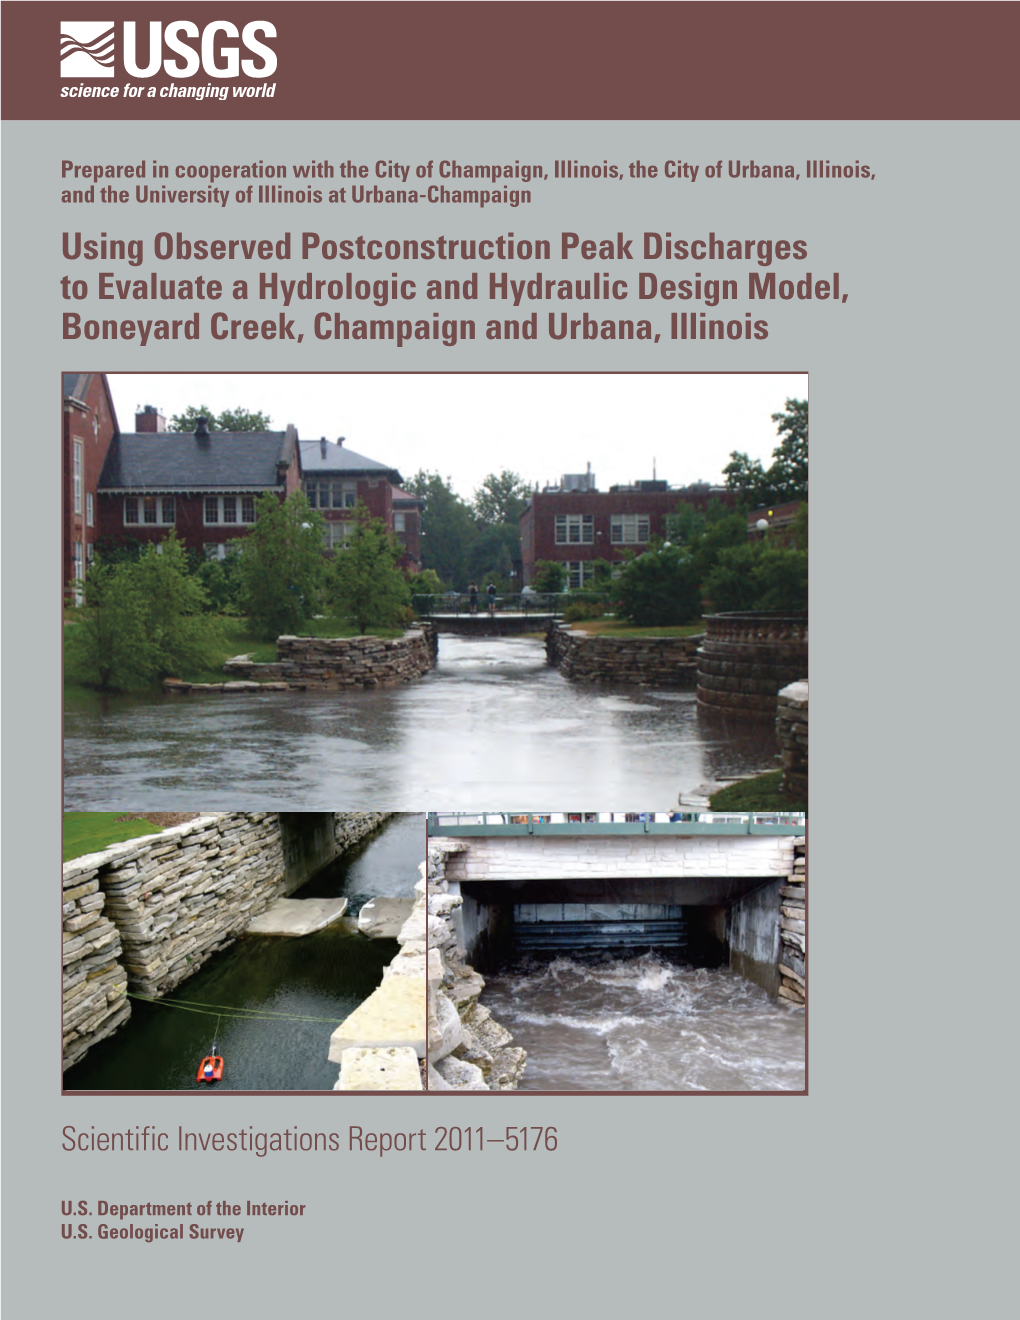 Using Observed Postconstruction Peak Discharges to Evaluate a Hydrologic and Hydraulic Design Model, Boneyard Creek, Champaign and Urbana, Illinois